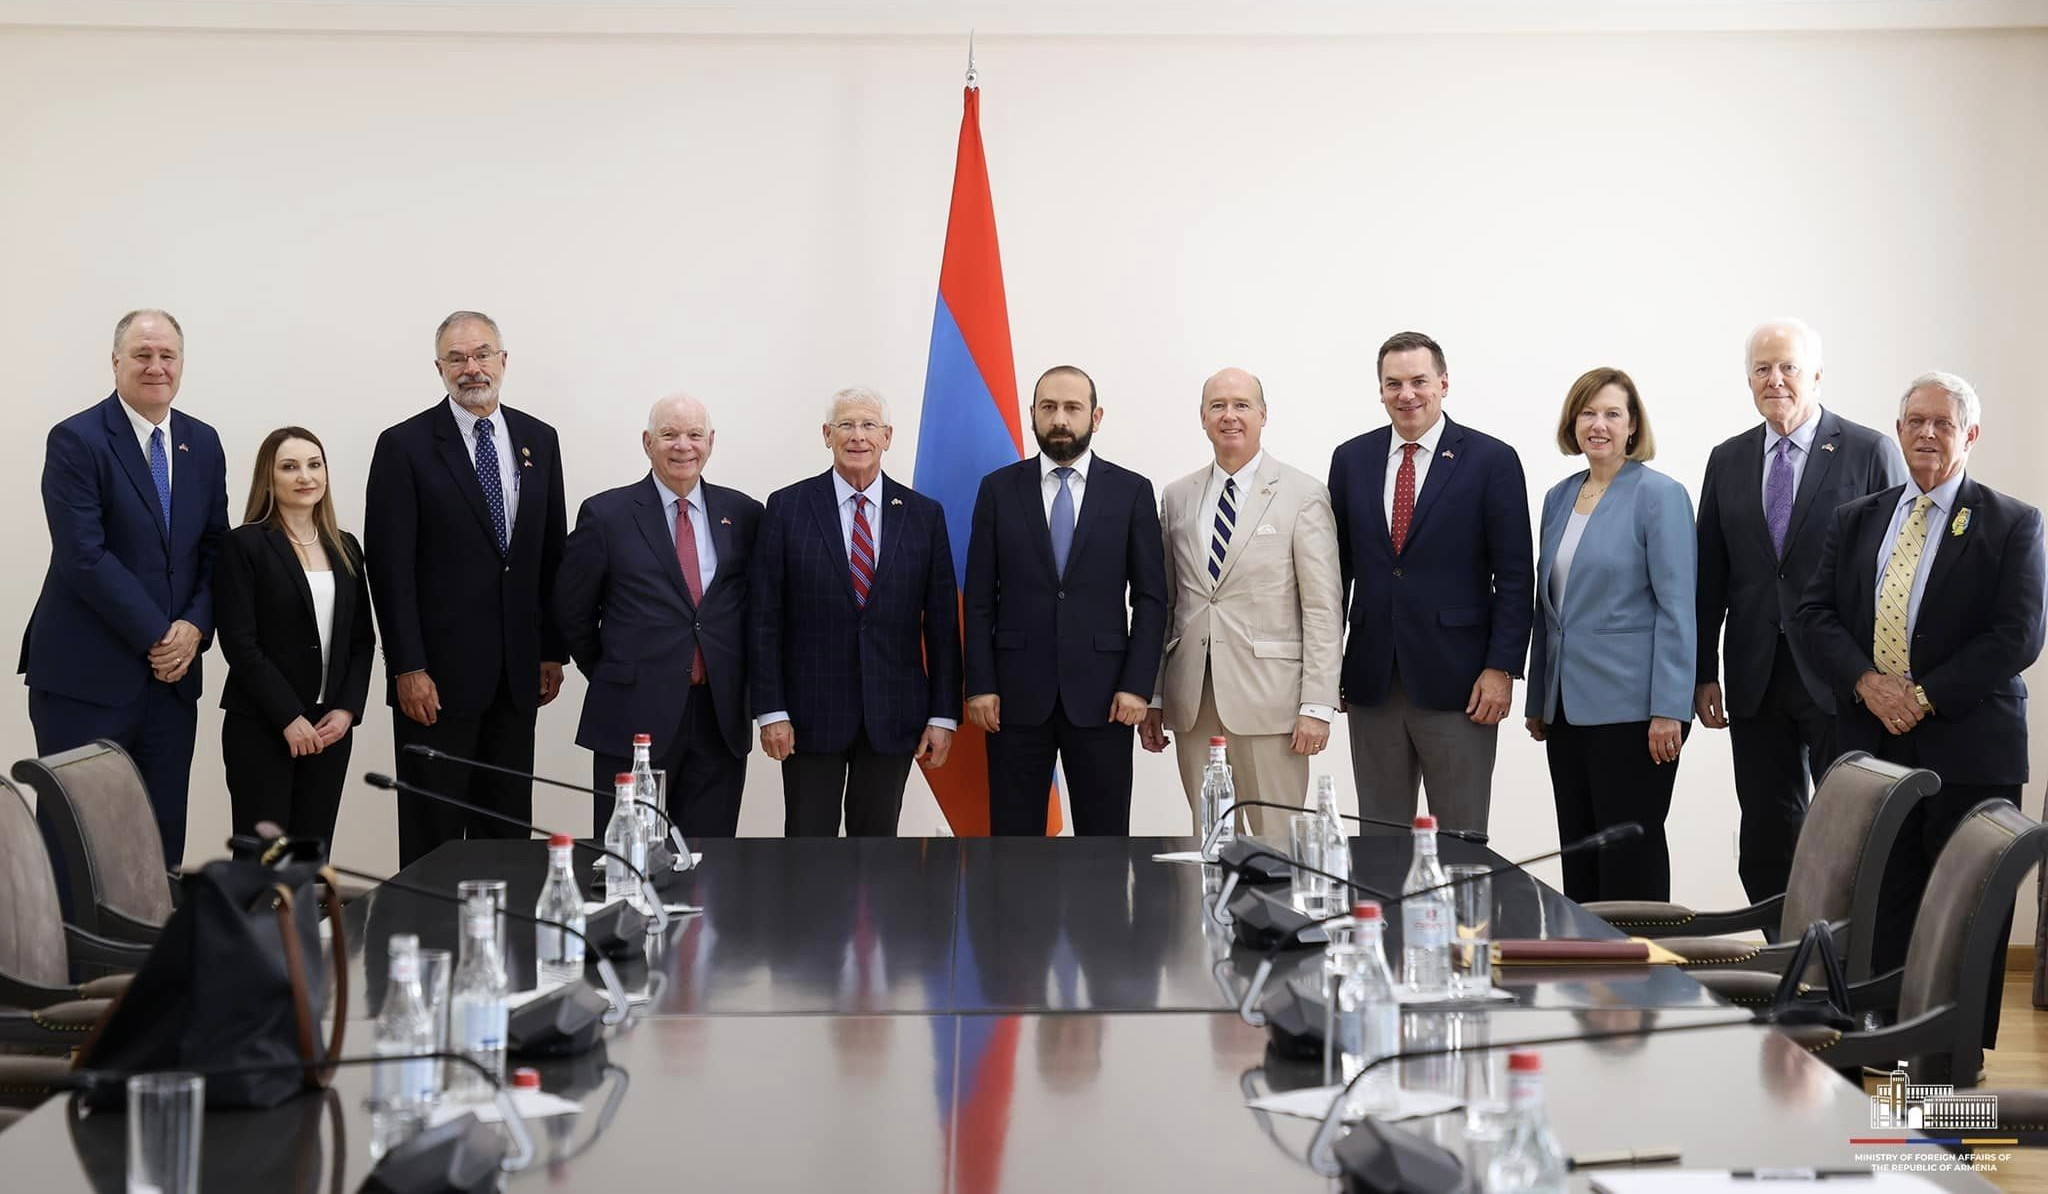 Meeting of the Foreign Minister of Armenia with the members of the U.S. Congress